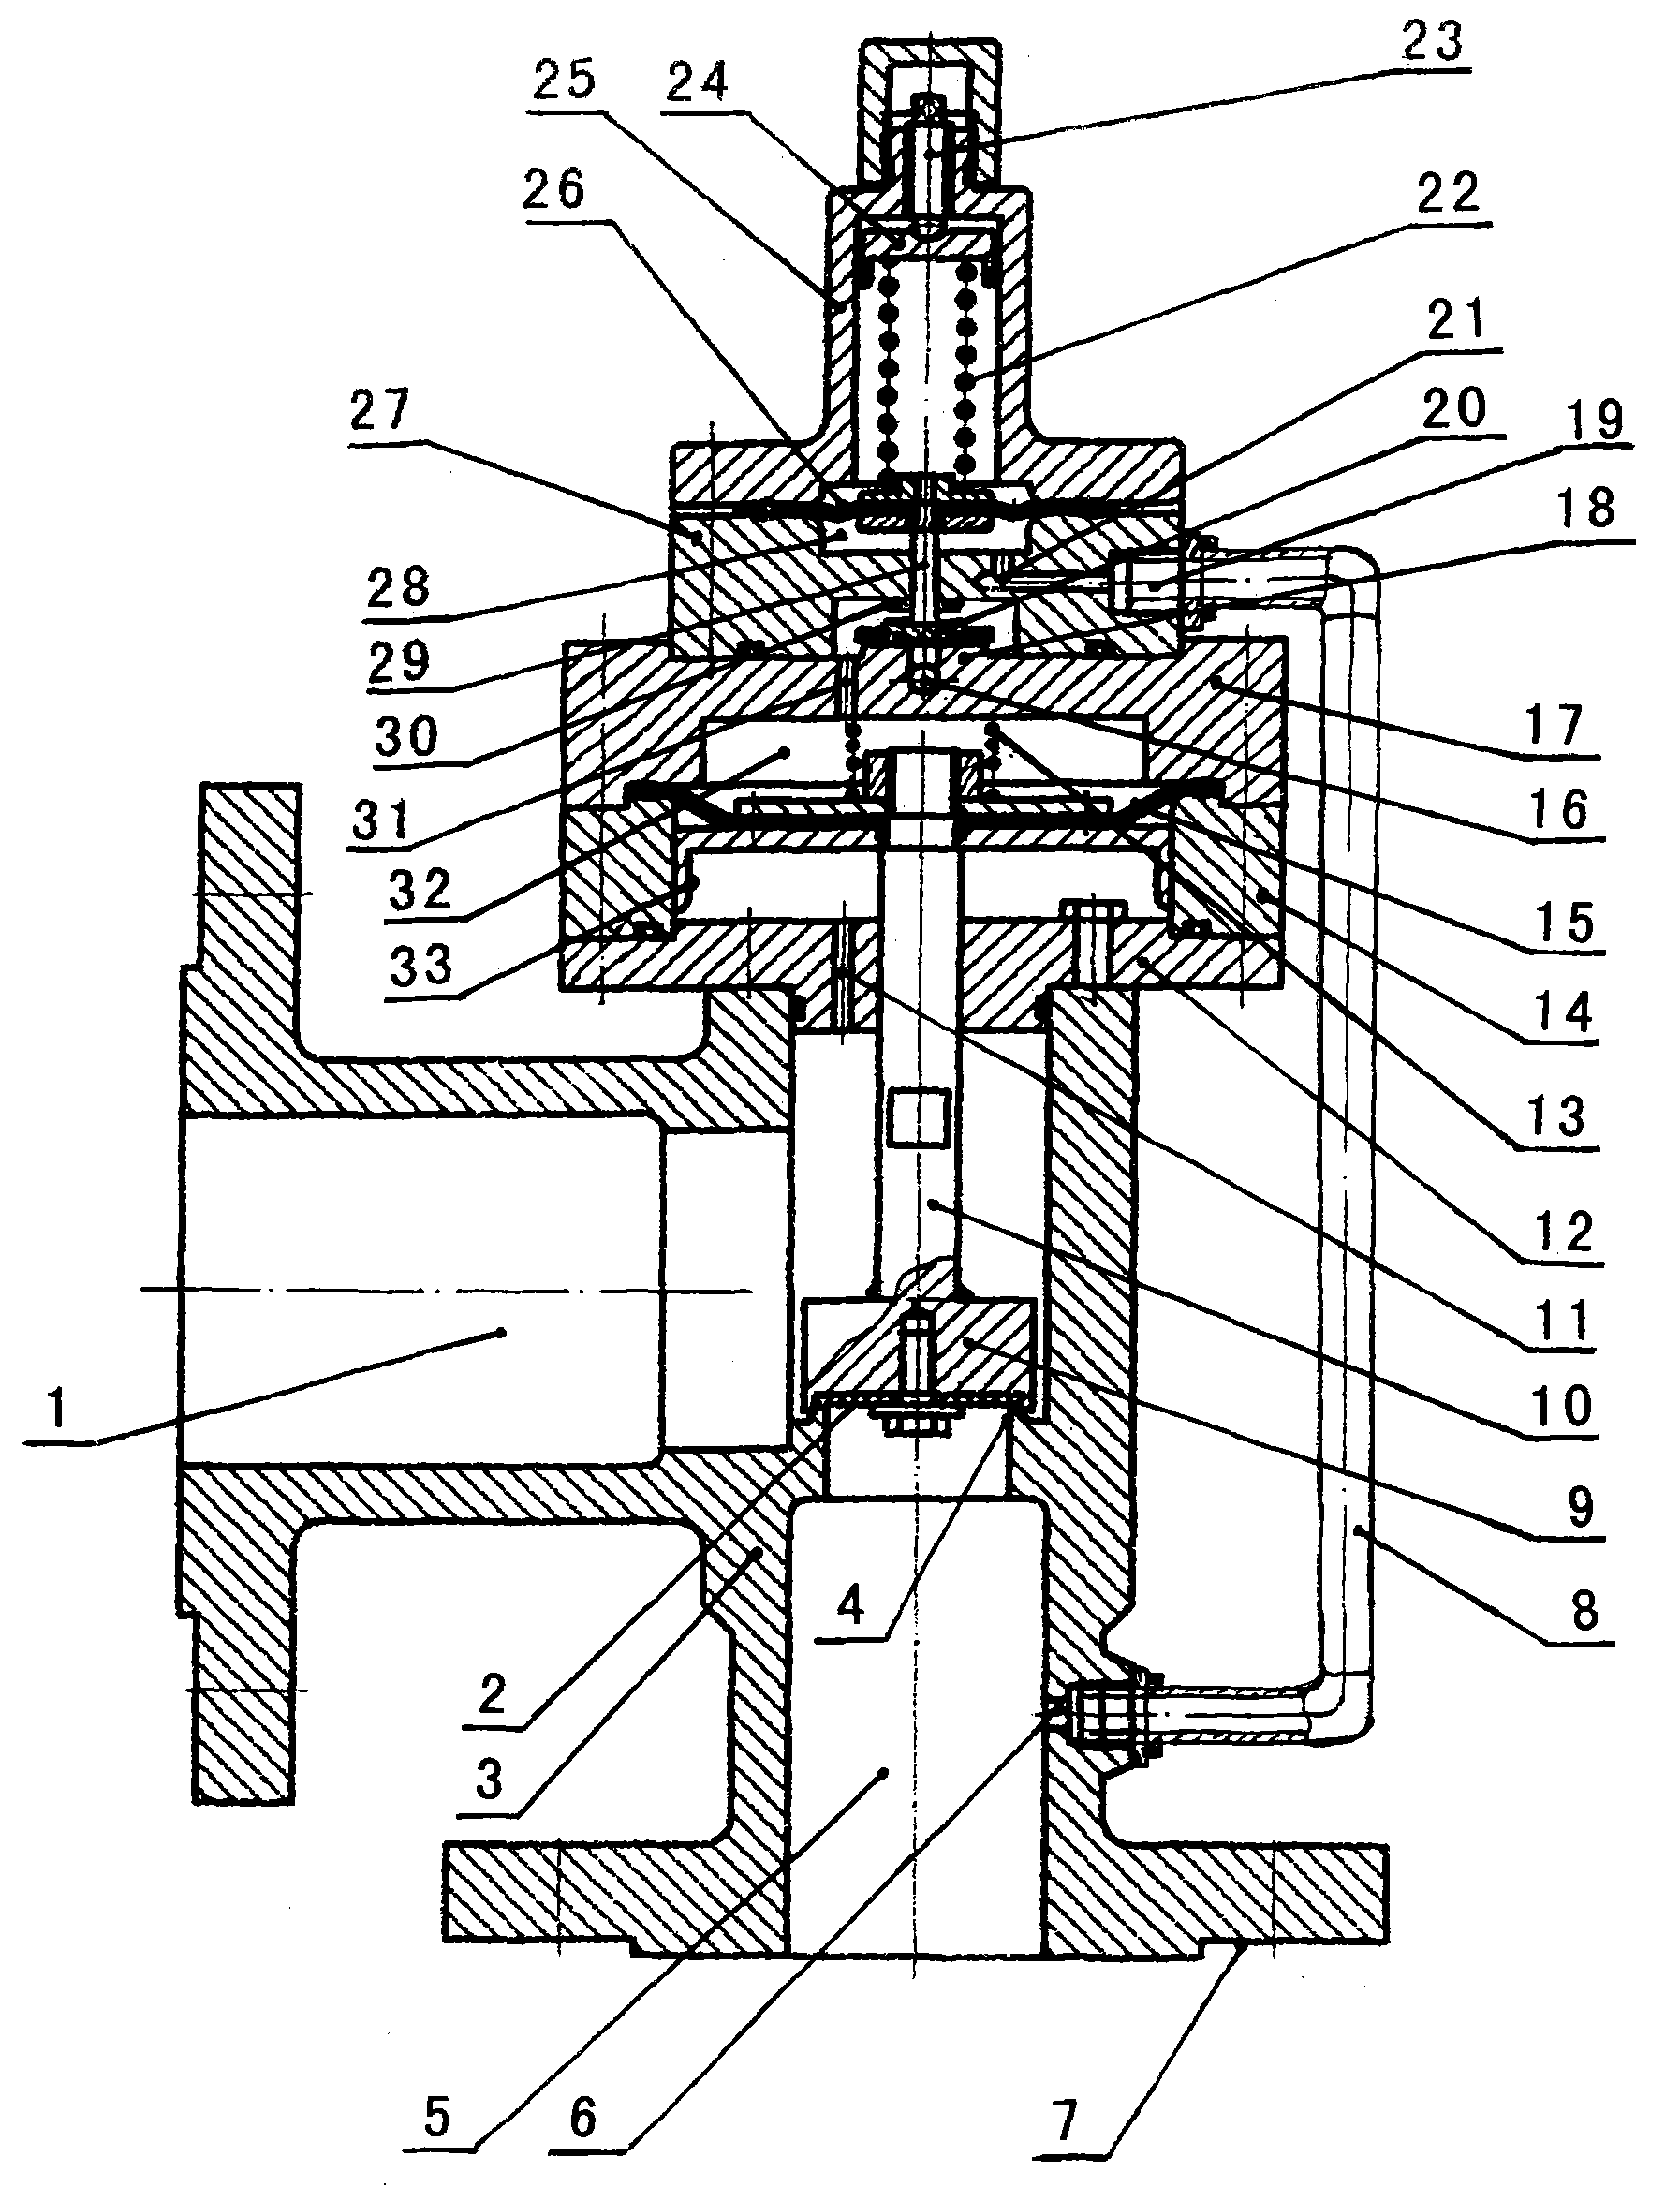 Low-pressure pilot operated safety valve